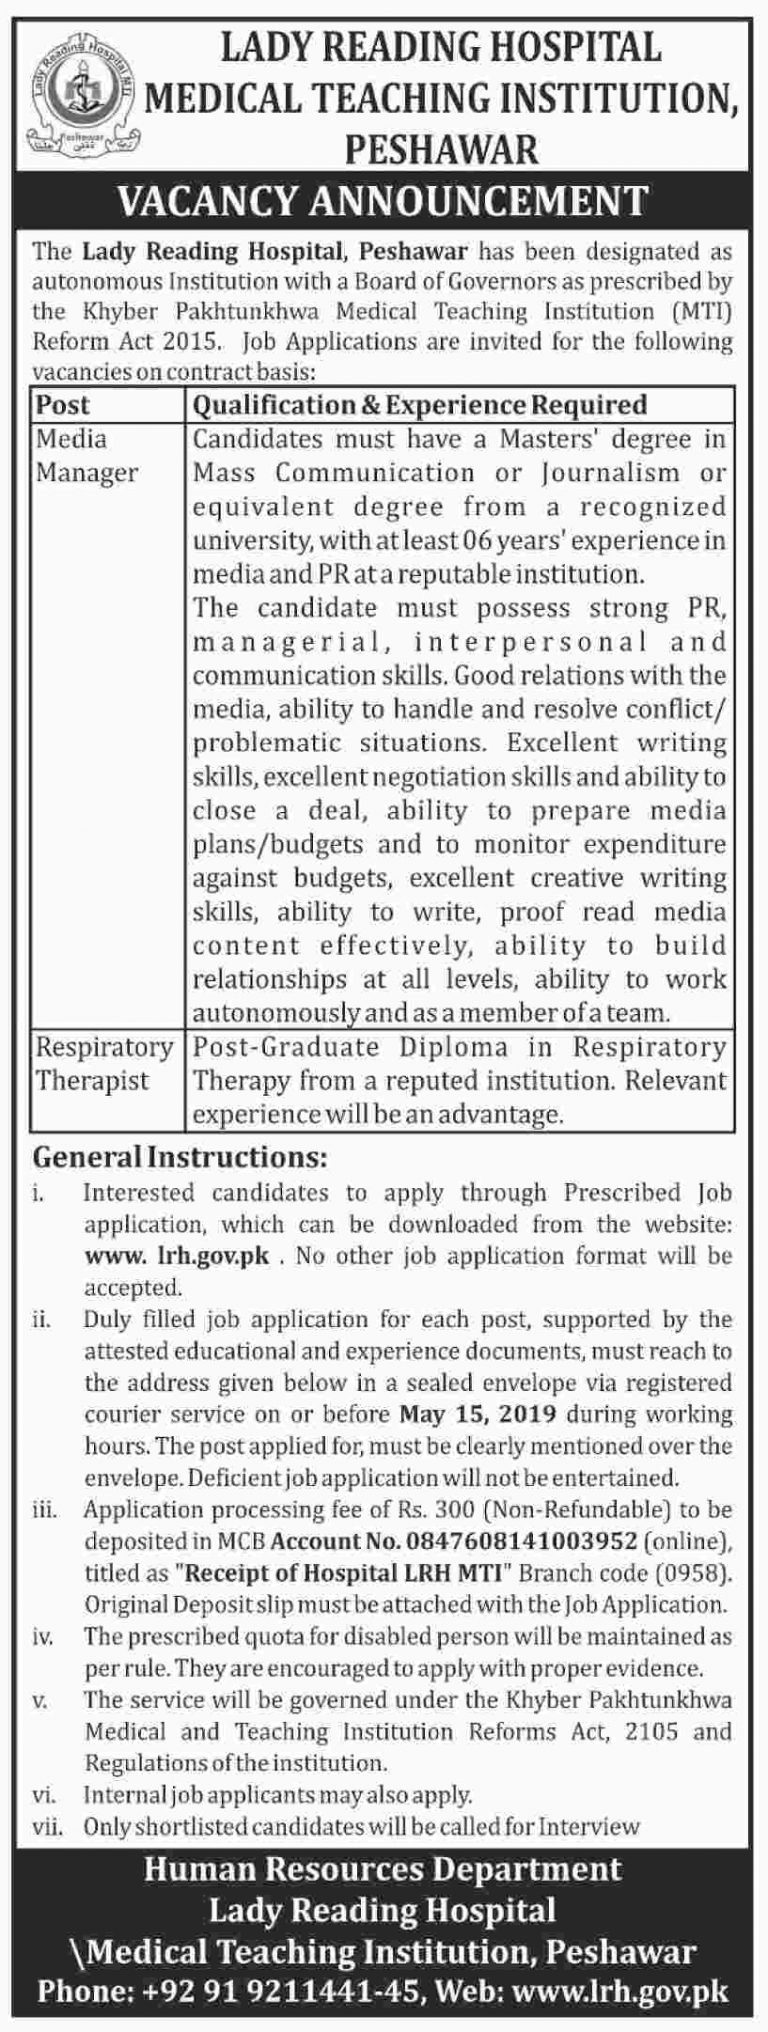 Lady Reading Hospital (LRH) Peshawar Jobs 2019 for Media Manager and Respiratory Therapist